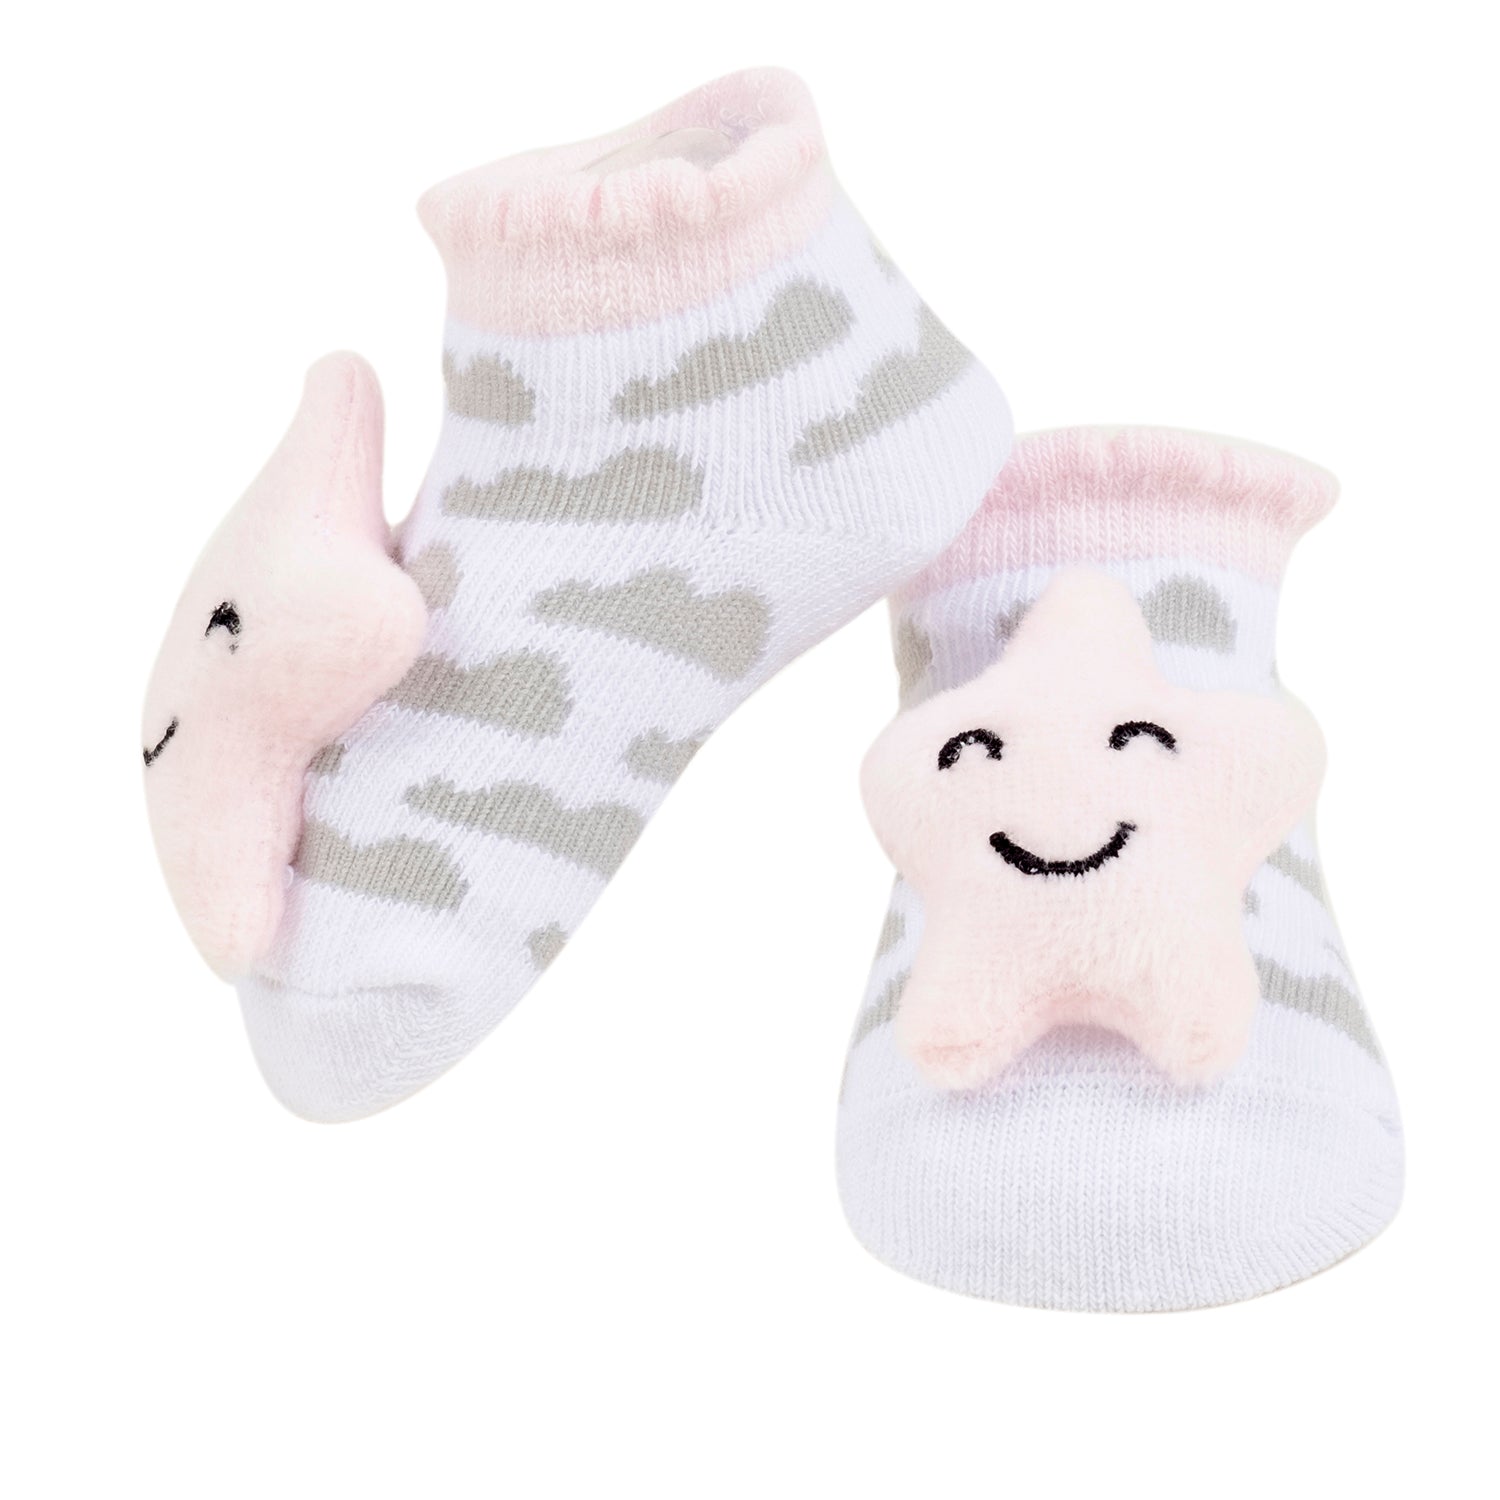 Baby Moo 3D Sleepy Star Cotton Ankle Length Fancy Infant Gift Set of 2 Socks Booties - Grey, Pink